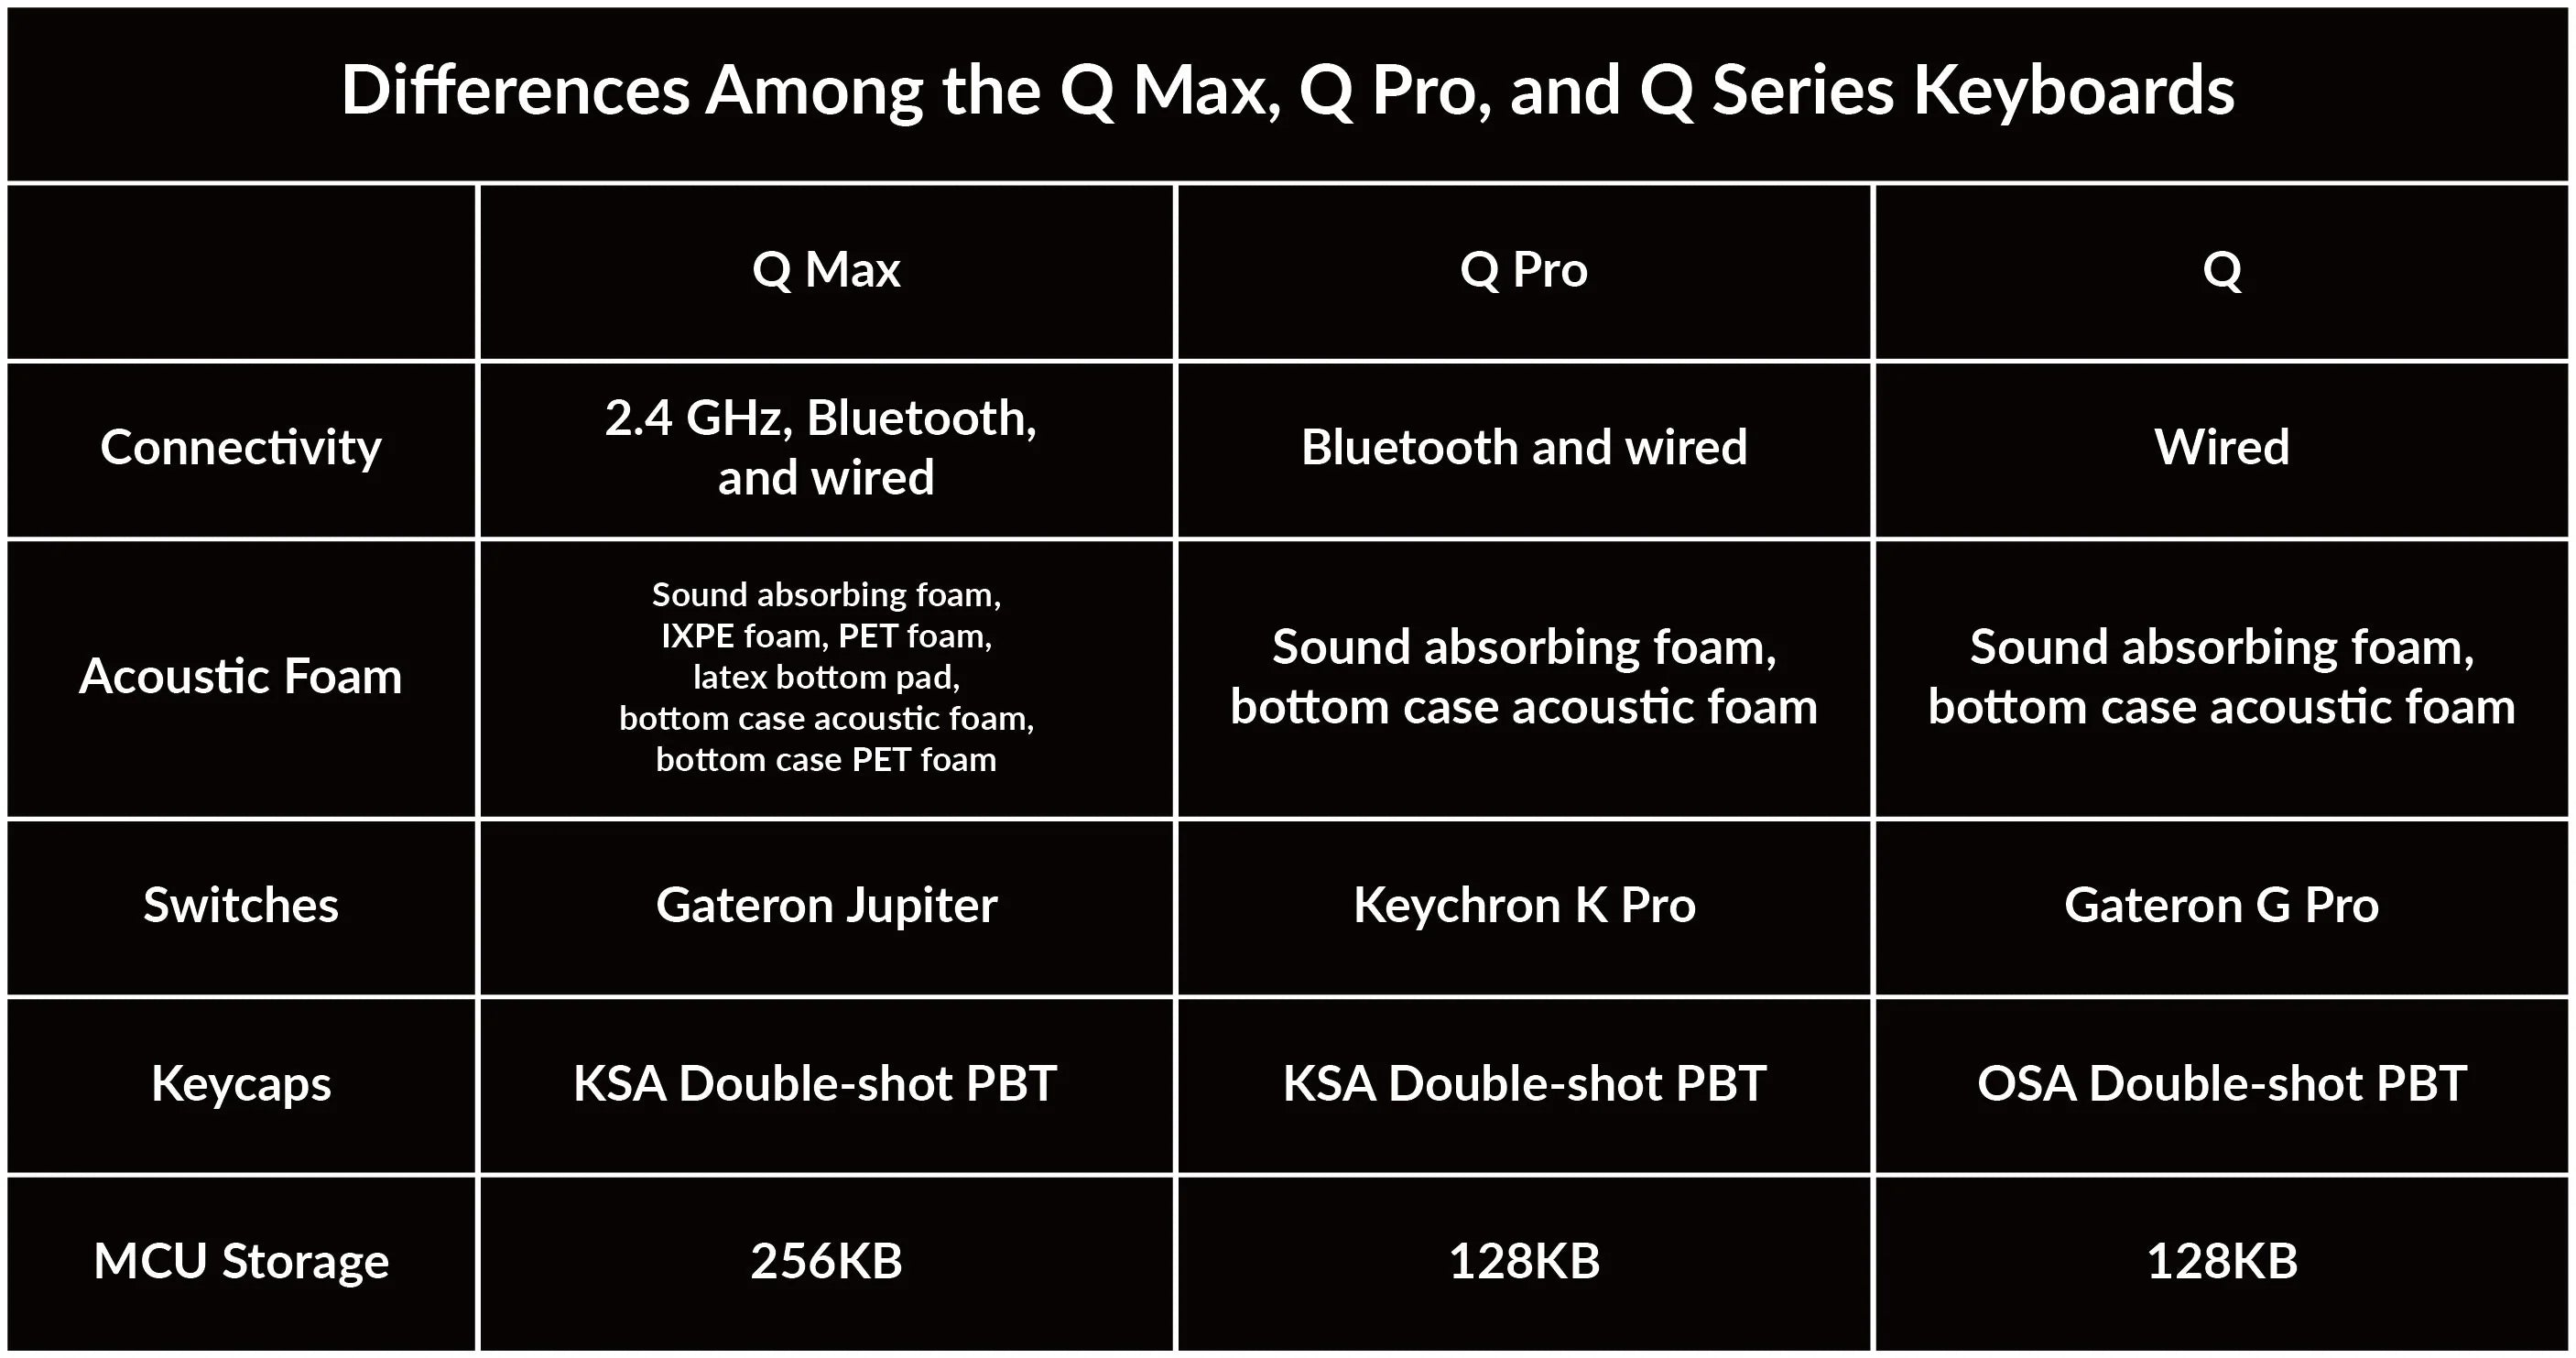 Differences Among ther Q Max, Q Pro, and Q Series Keyboards